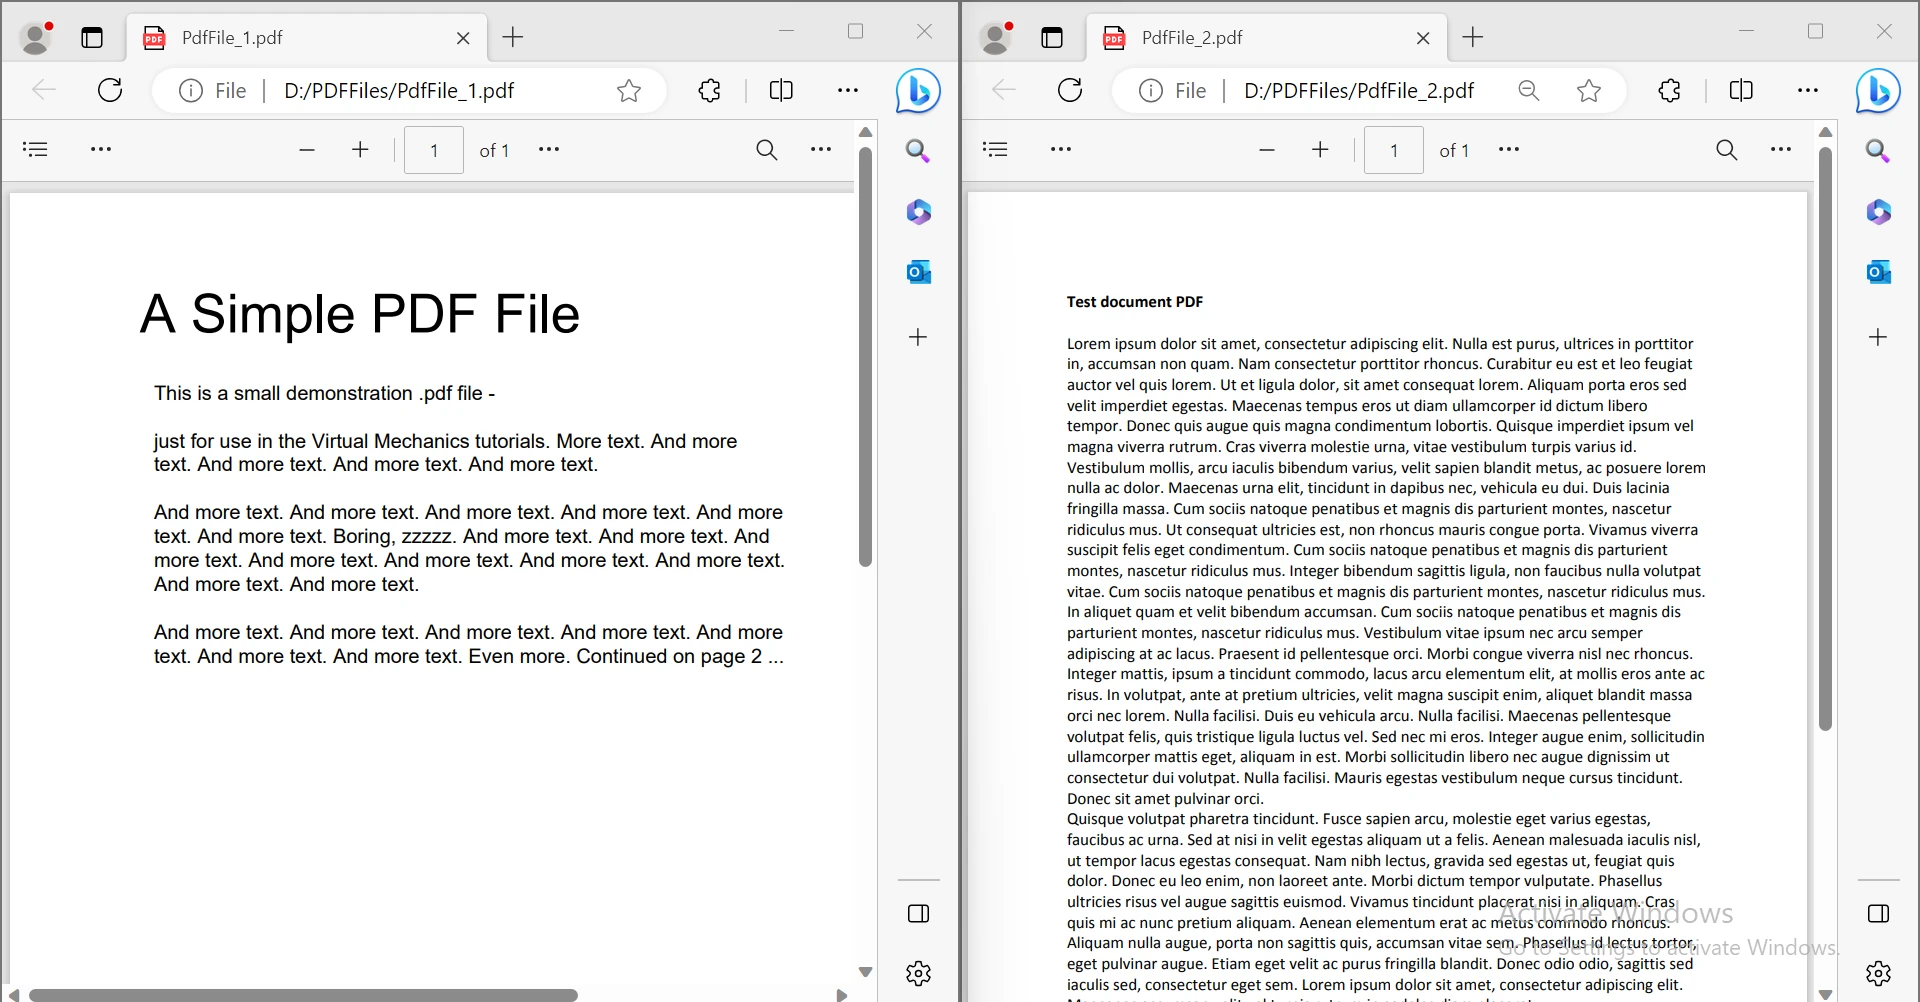 **How to Merge PDF Files Using iTextSharp**: Figure 3 - A simple PDF file, with a title A Simple PDF File and some body text beneath, along with a single-page PDF article.